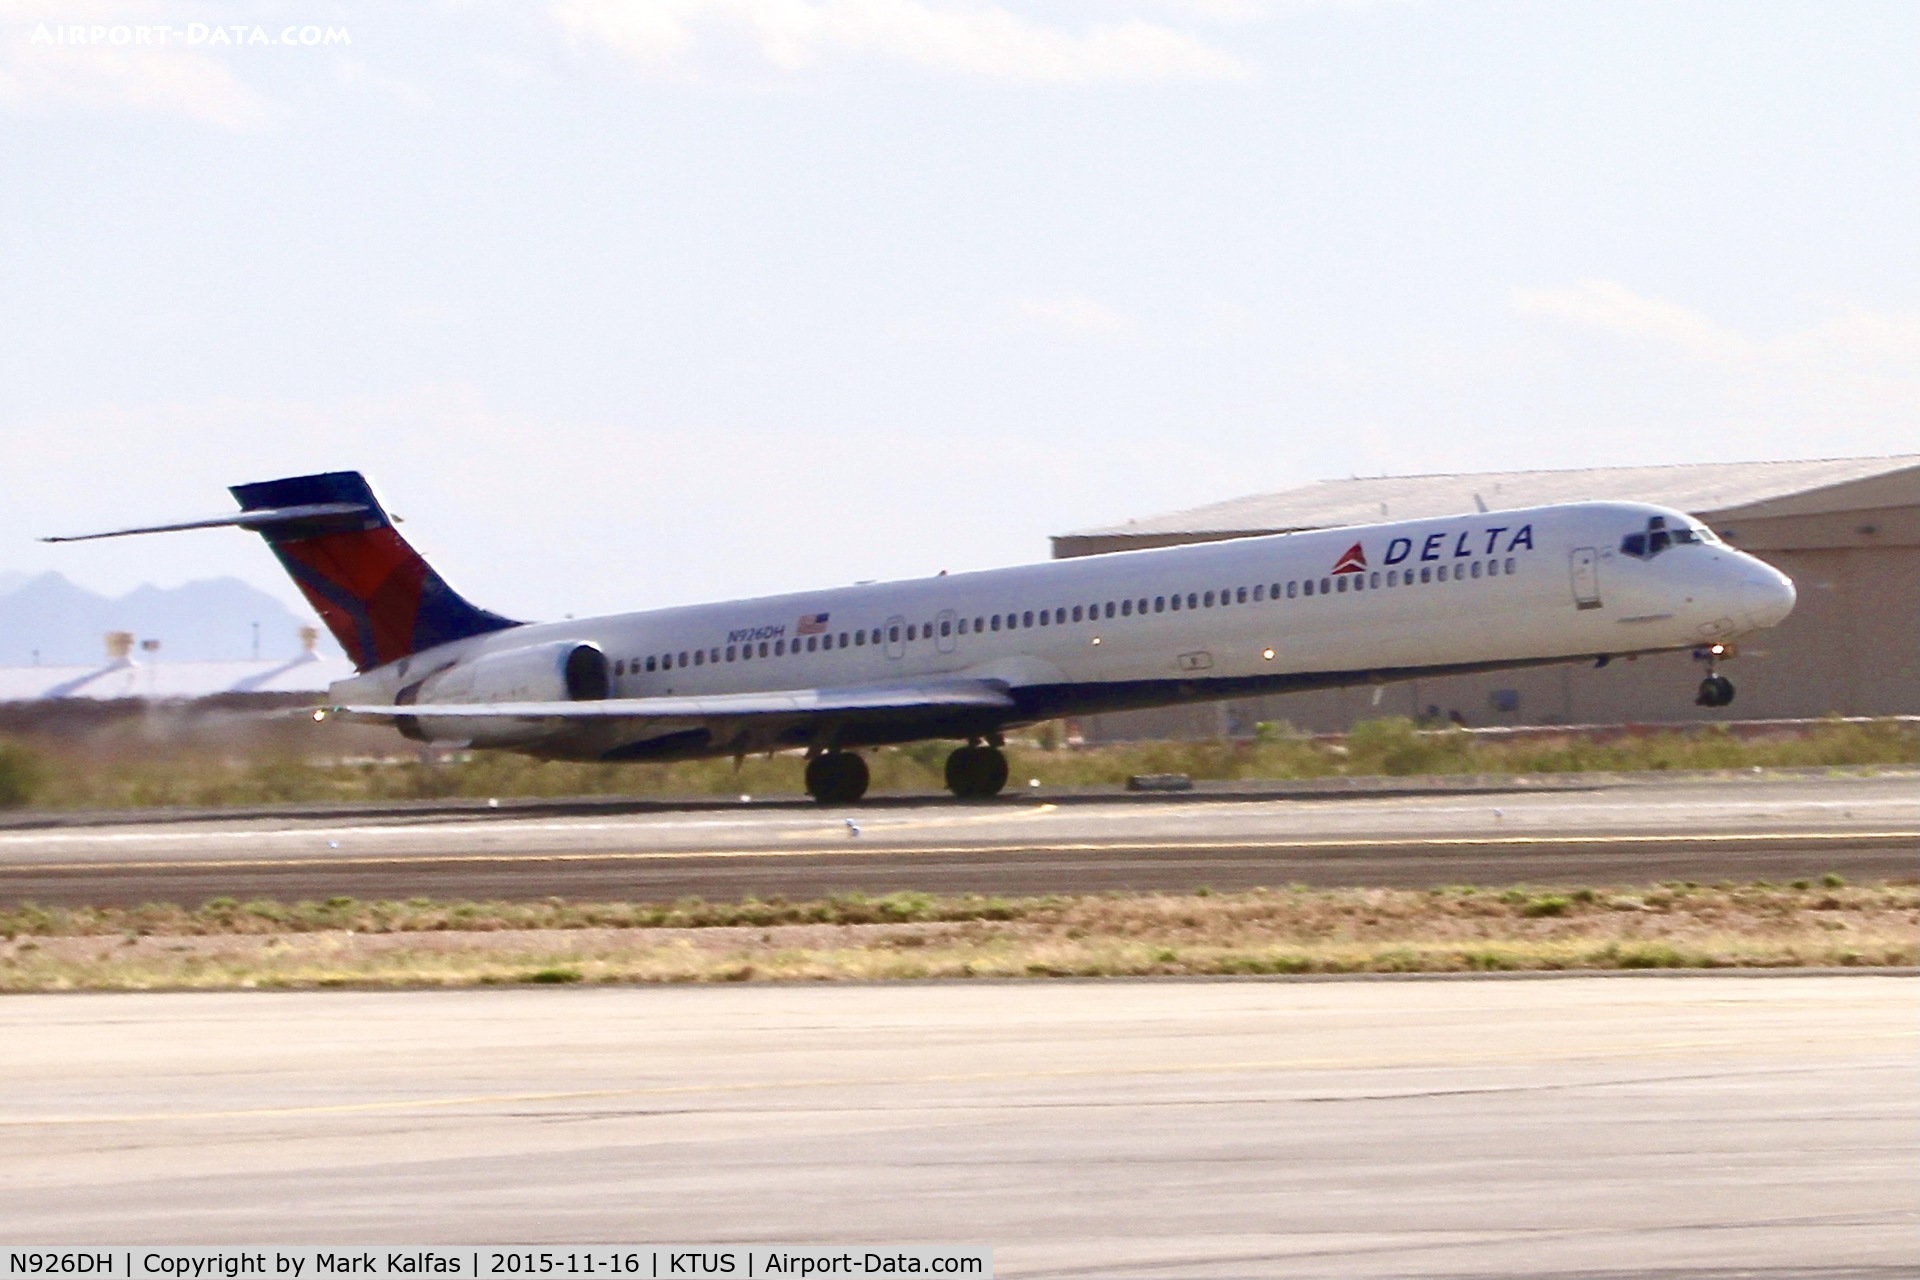 N926DH, 1998 McDonnell Douglas MD-90-30 C/N 53588, Delta McDonnell Douglas MD-90-30, MD-90-30 departing Tuscon